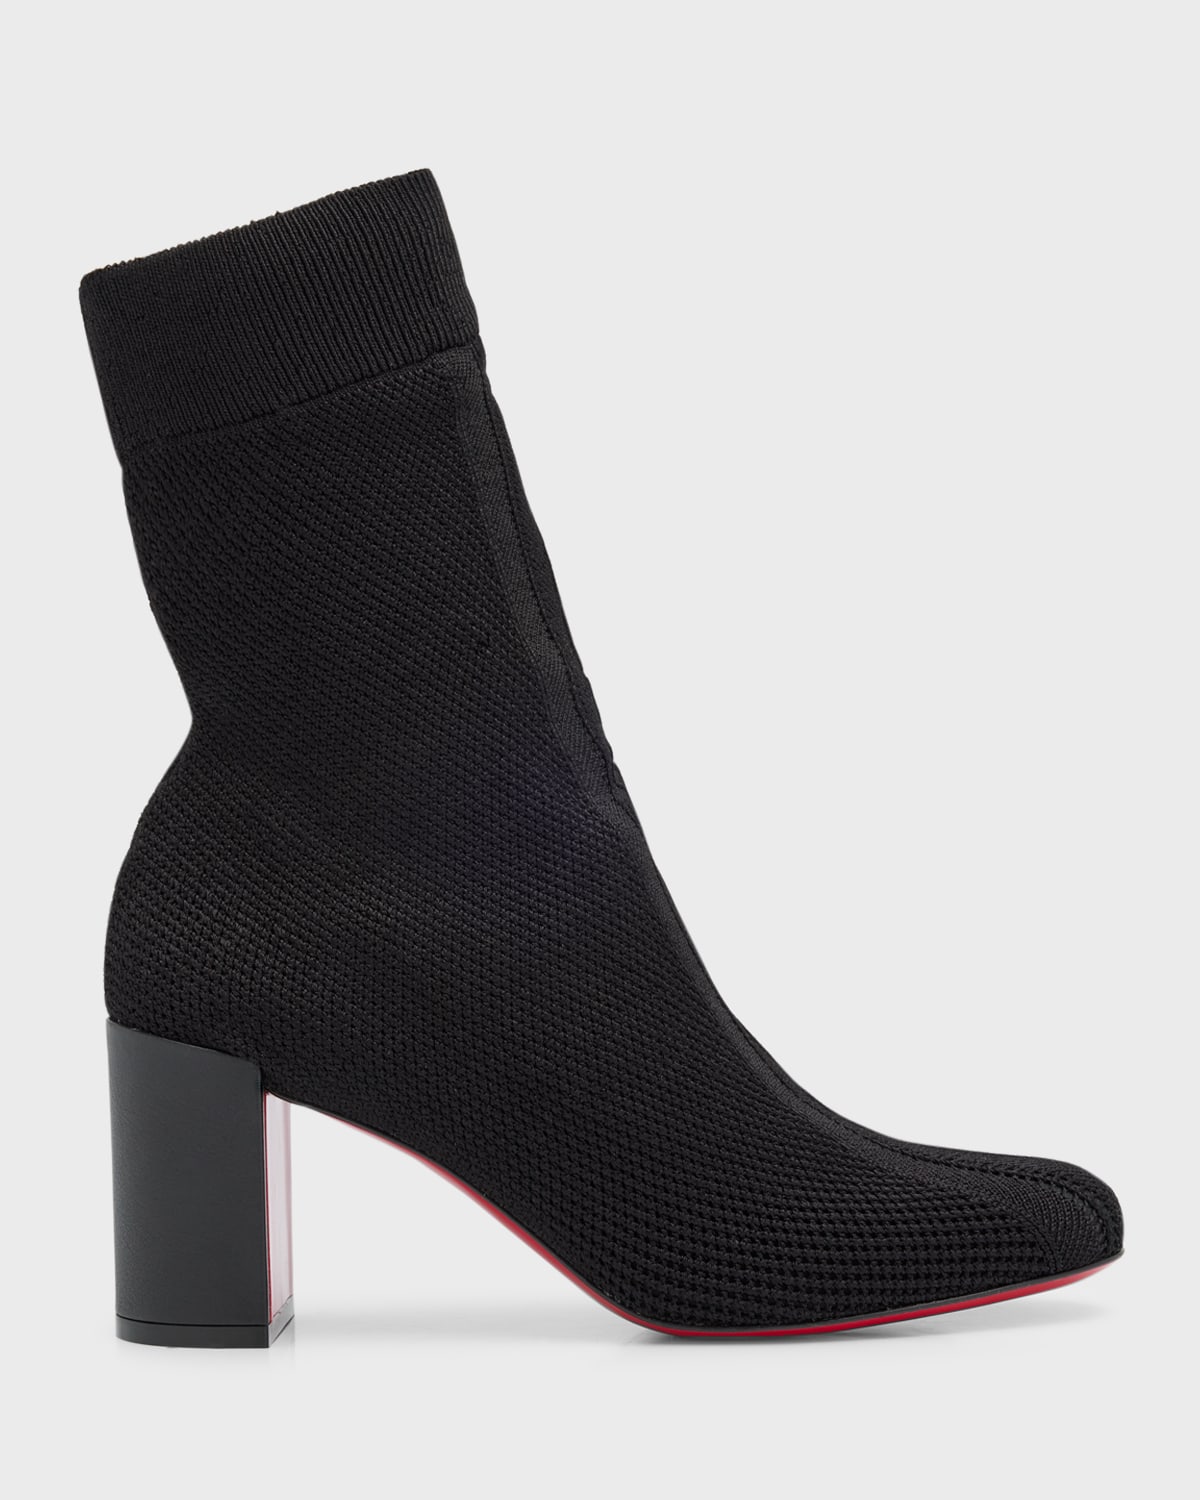 Beyonstage Red Sole Knit Mid-Calf Boots